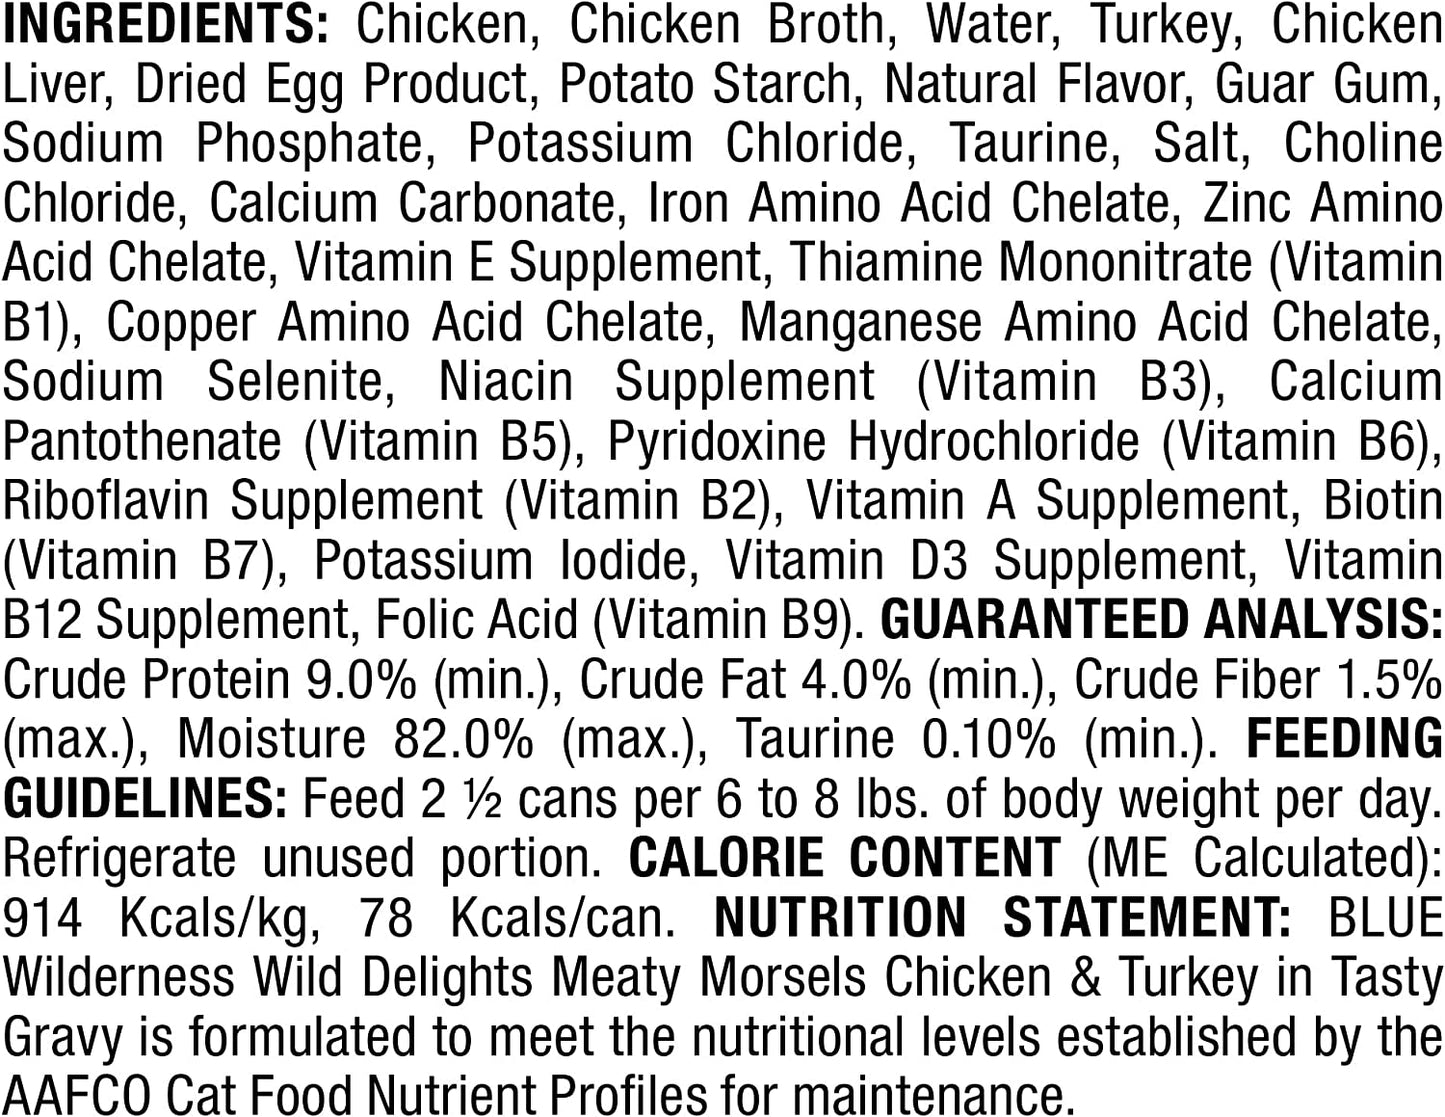 Blue Buffalo Wilderness Wild Delights High Protein Grain Free, Natural Adult Meaty Morsels Wet Cat Food, Chicken & Turkey 3-Oz Cans (Pack of 24)